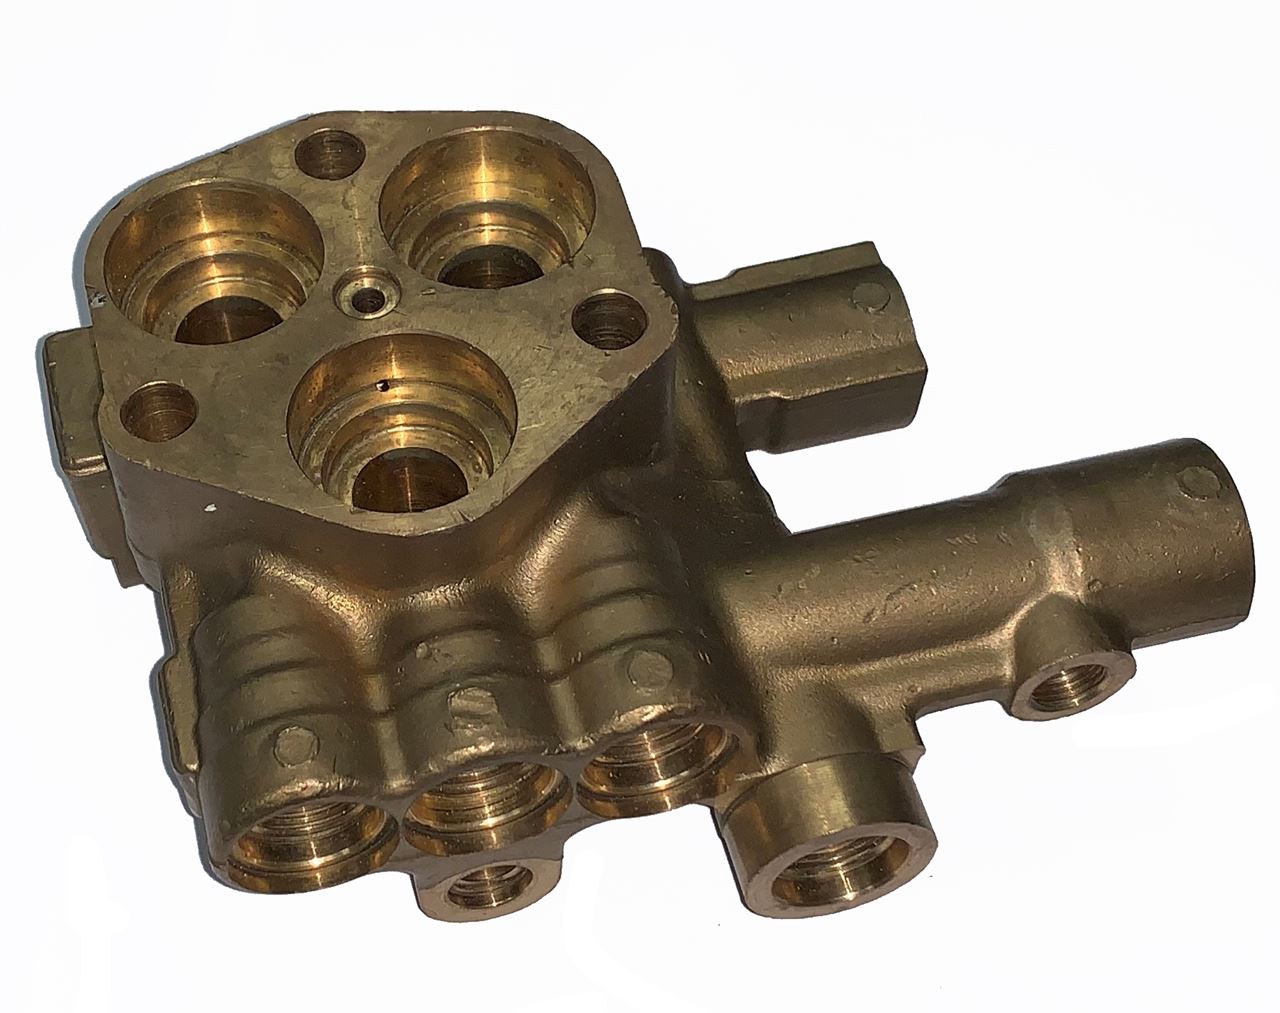 Details about   AR Check Valve Cap For RMV RMW and SRMW pumps between 2800 and 3000 PSI SRMV 